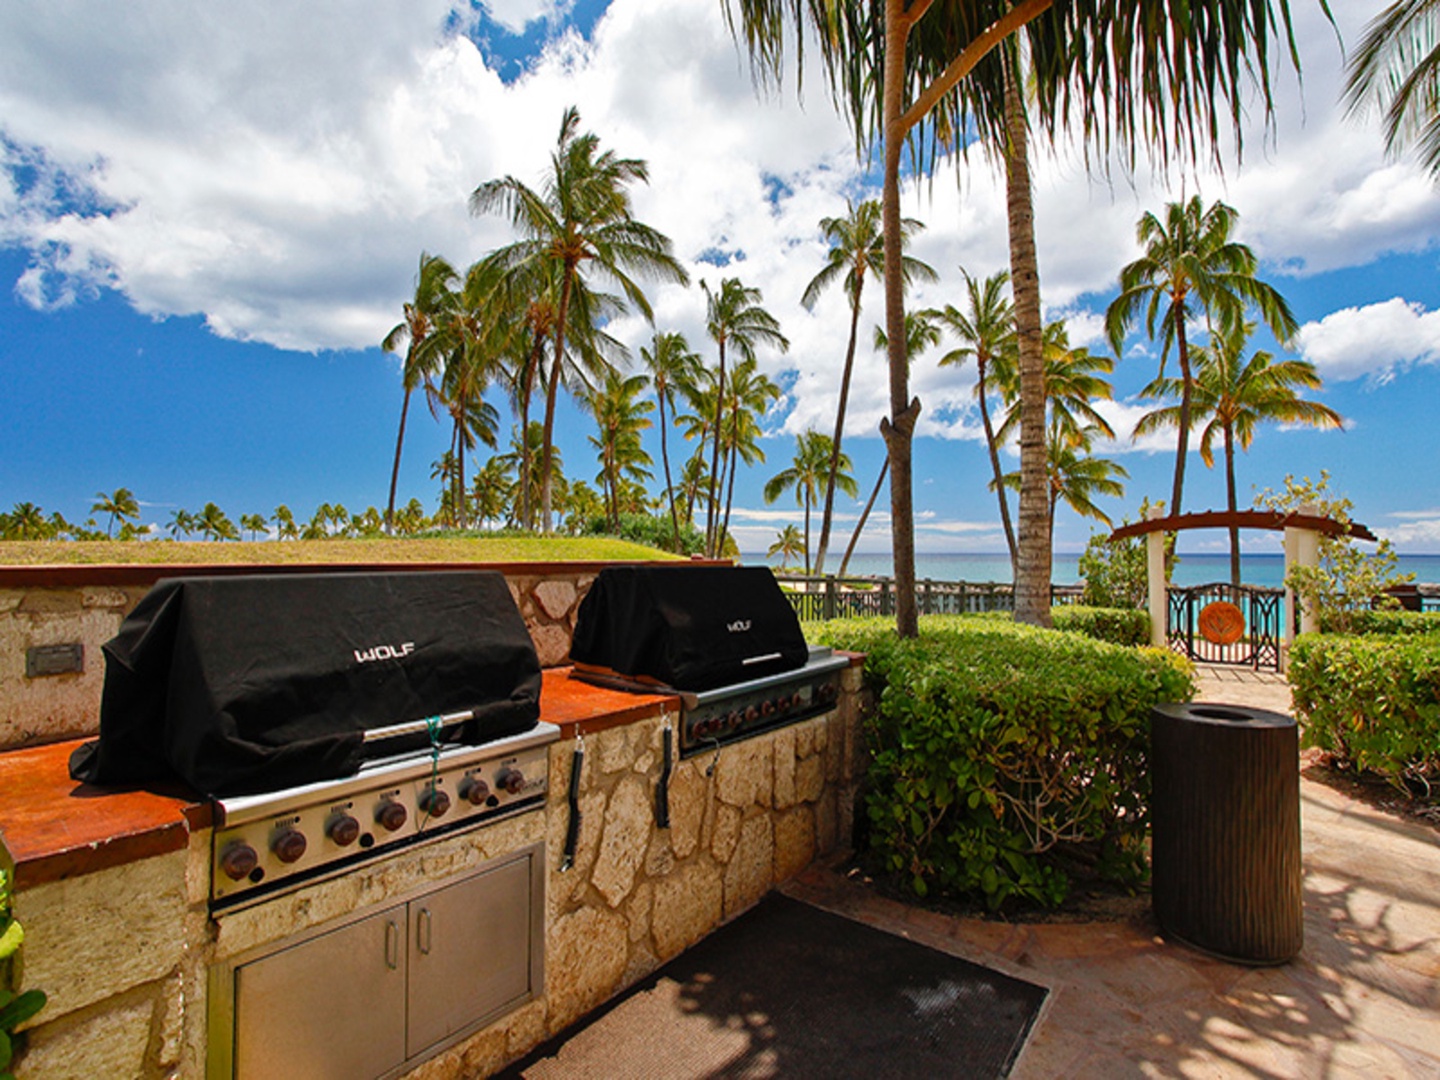 Kapolei Vacation Rentals, Ko Olina Beach Villas O1004 - BBQ grill area for all guests to use, while enjoying the views.